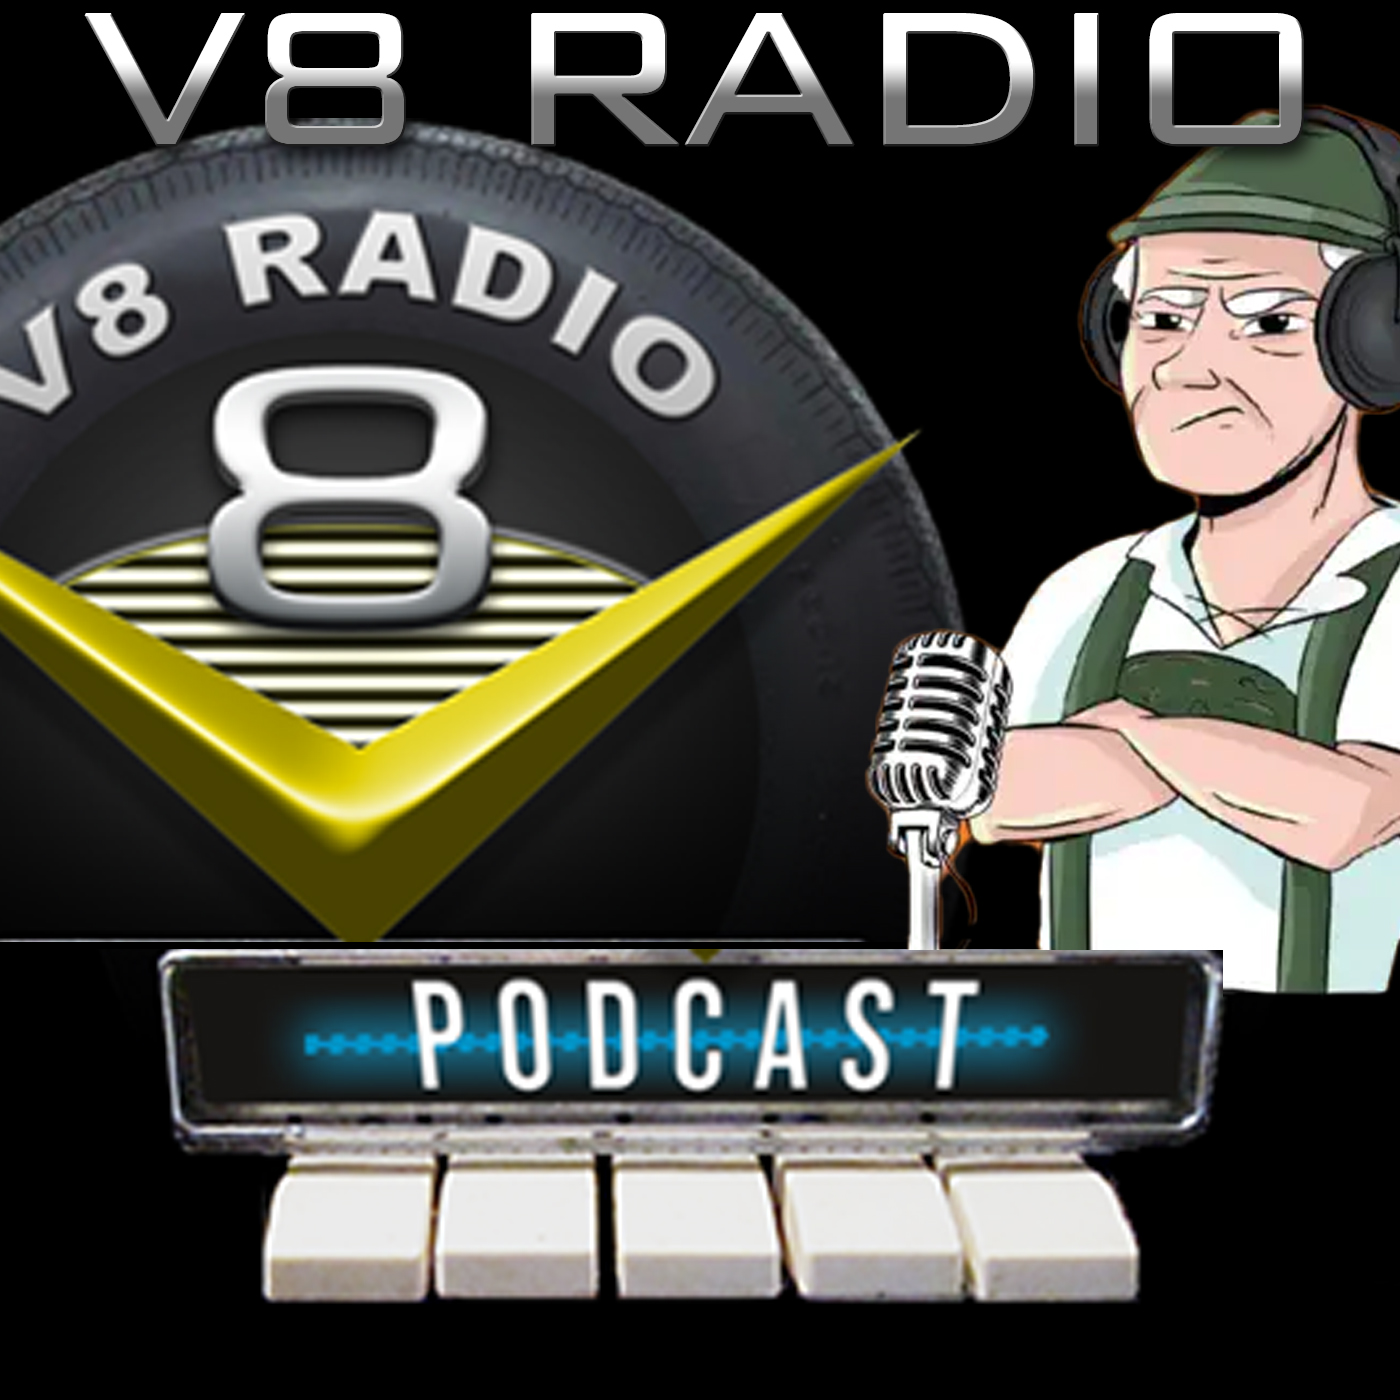 DUAL EPISODE - Combining the V8 Radio Podcast with the Stubborn German Brewing Podcast for a Whole New Level of Podcast Fun!